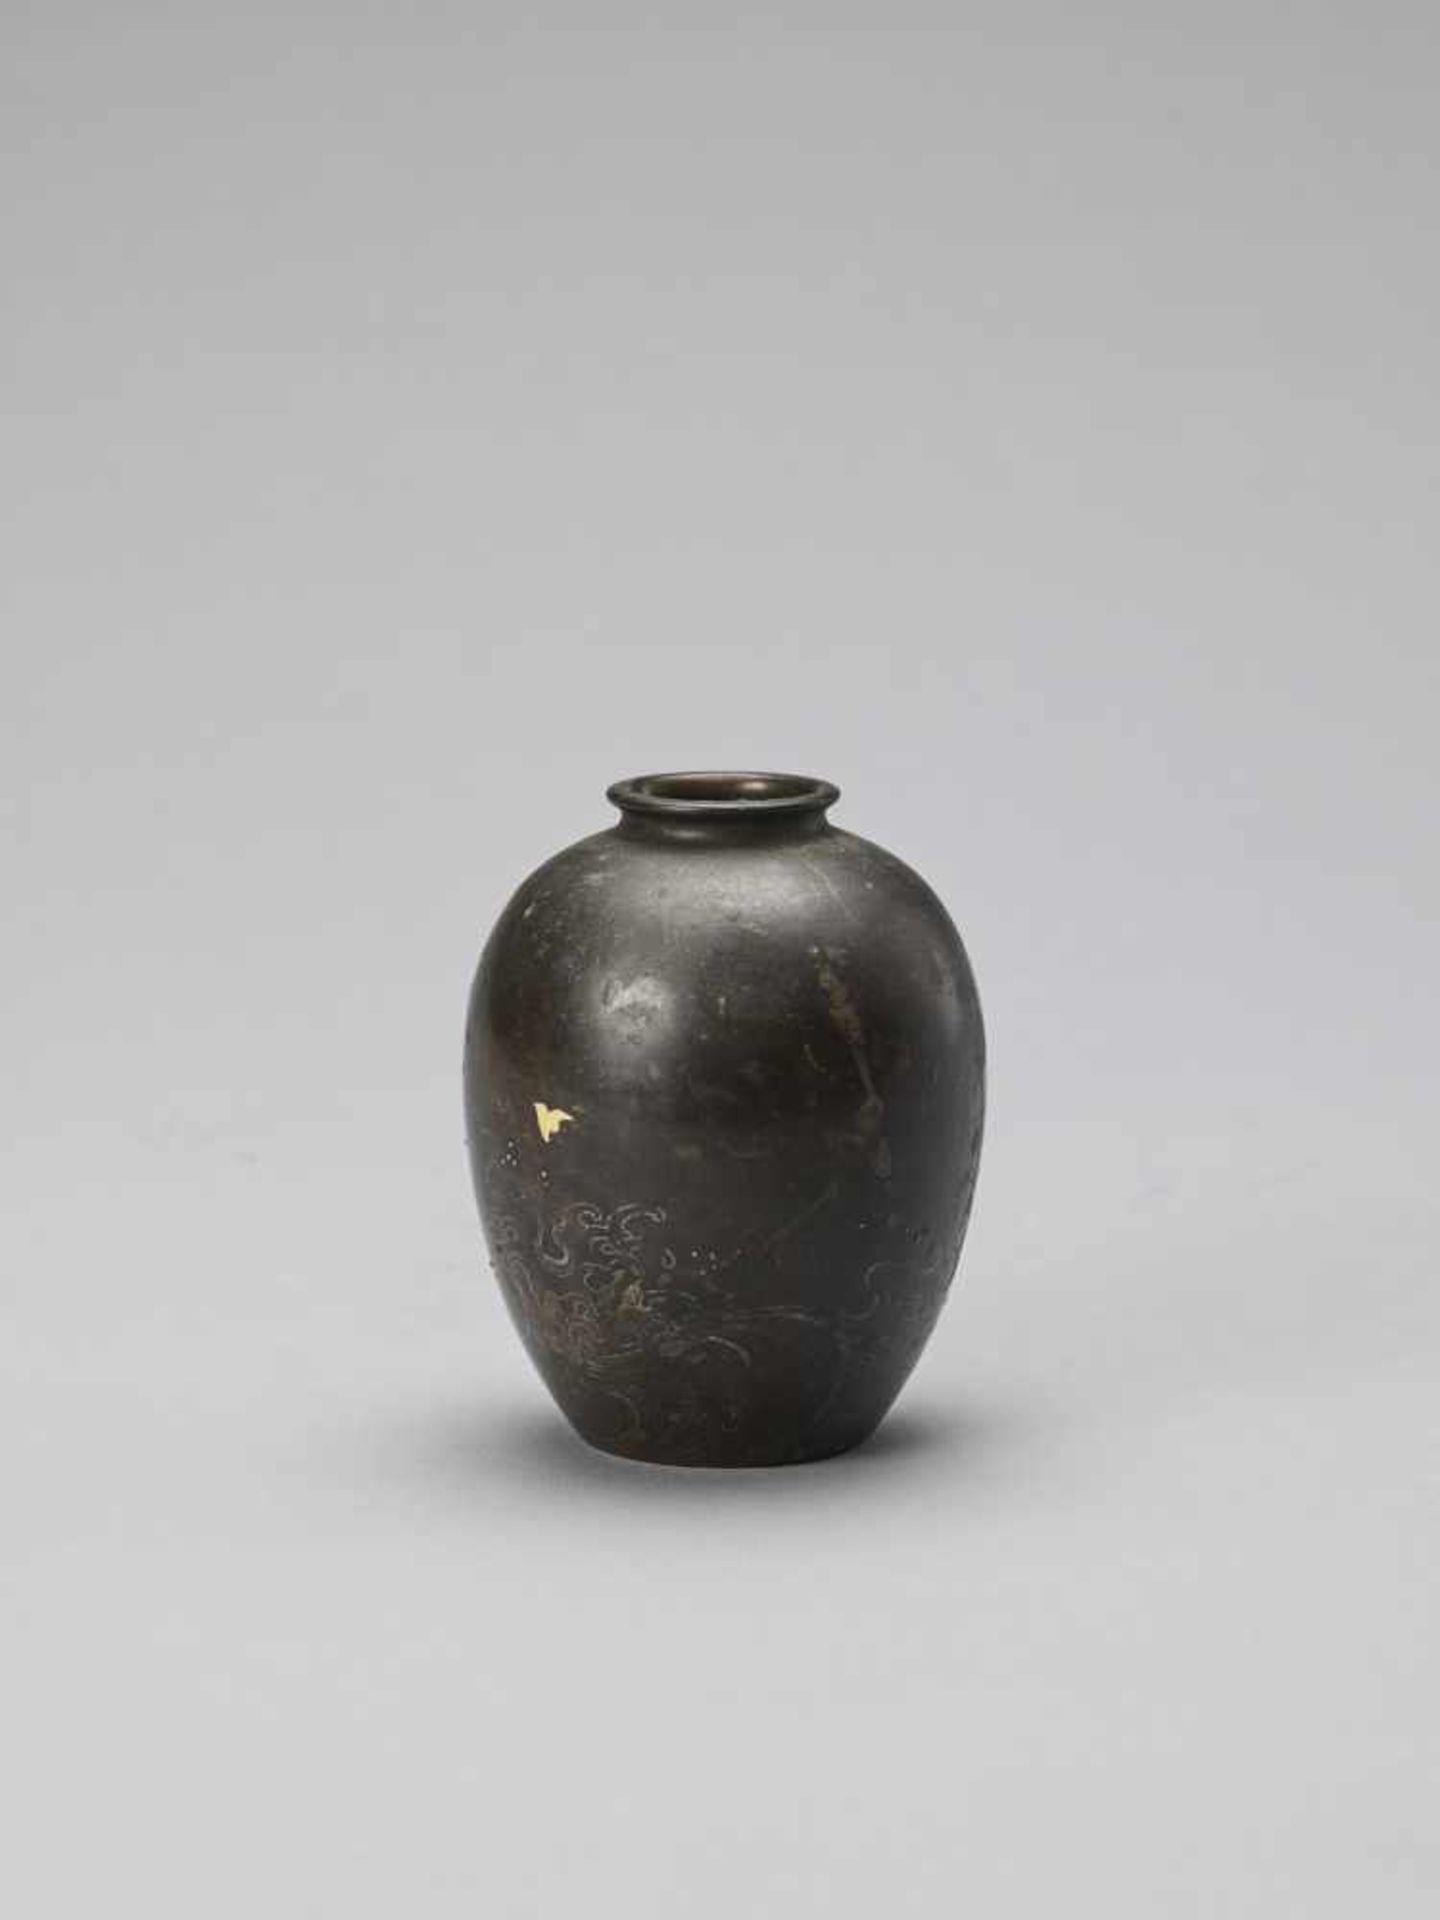 A SMALL SILVER INLAID BRONZE VASE - Image 2 of 7